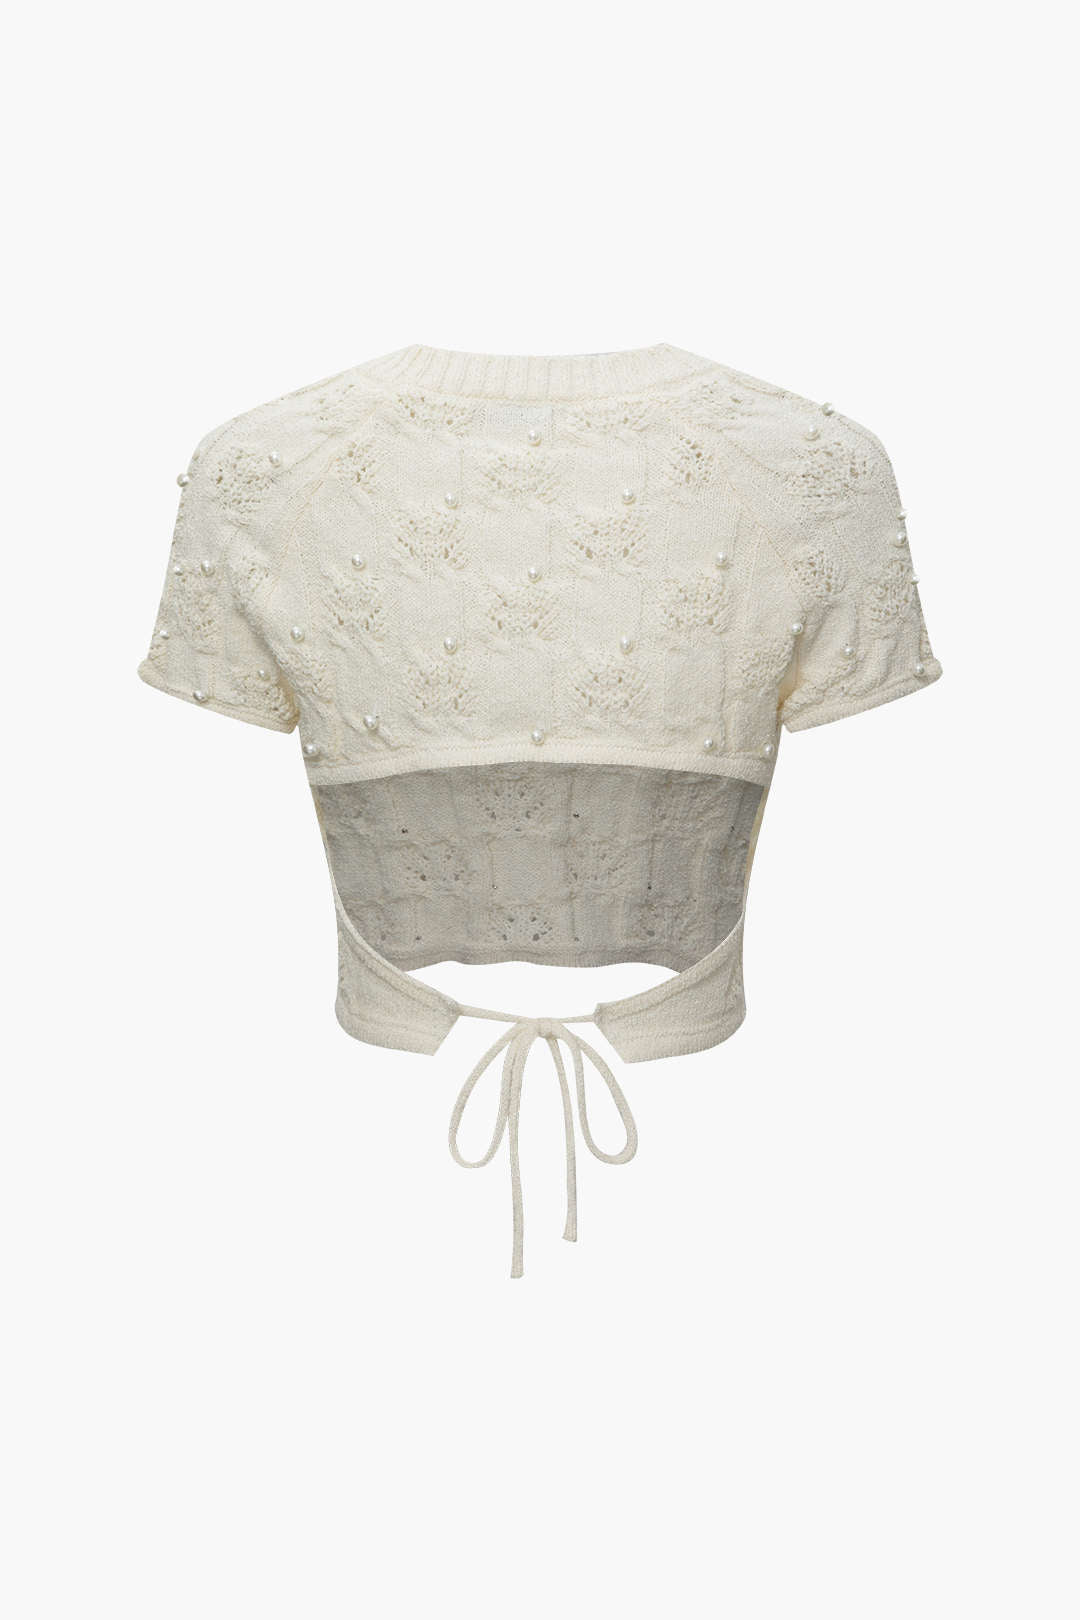 Pearl Embellished Open Knit Tie Back T-Shirt